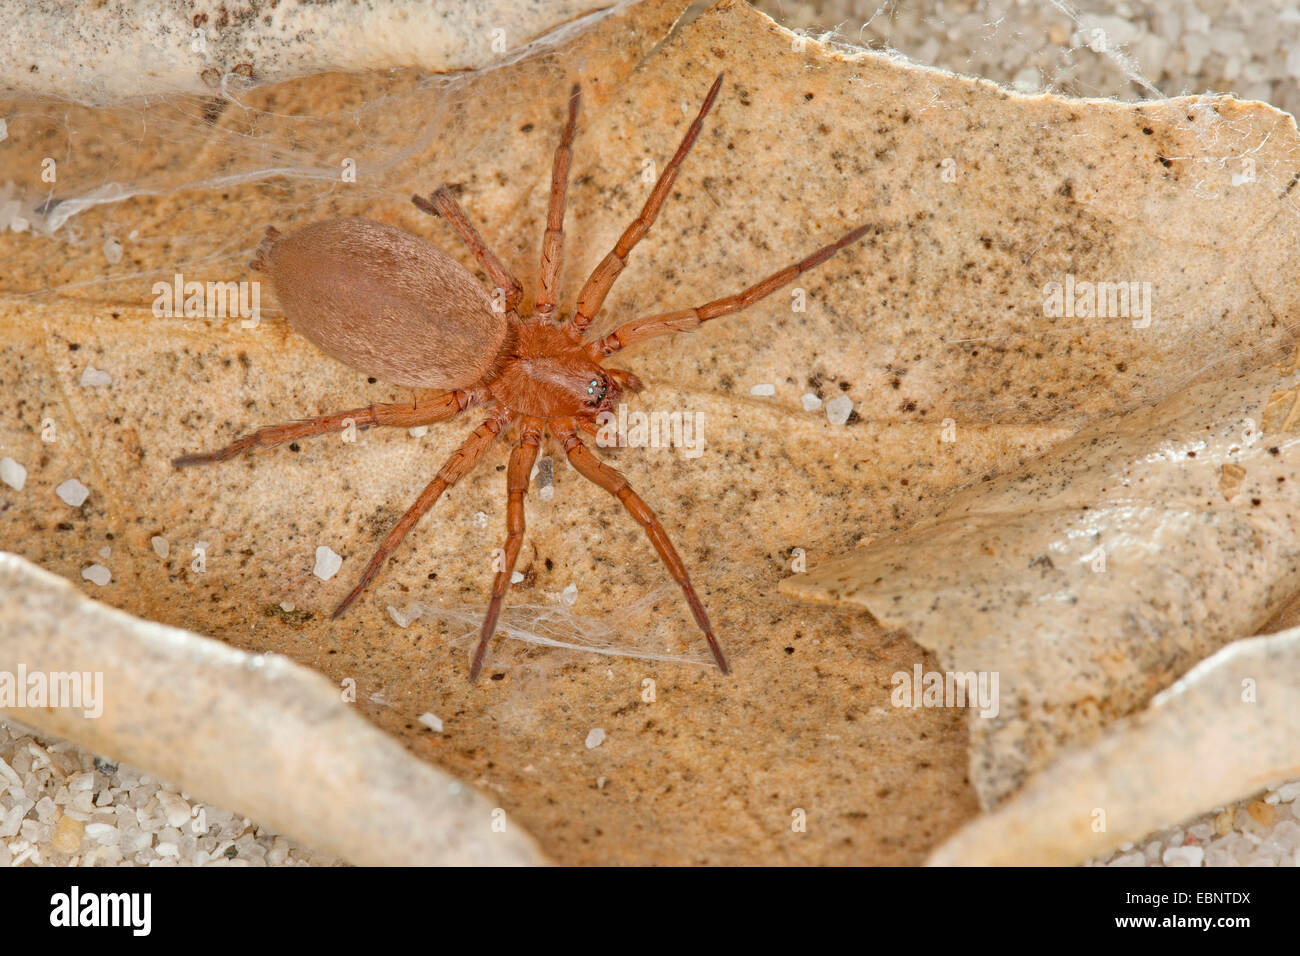 Stone spider, Mouse Spider, Ground spider (Drassodes cf. lapidosus), on a withered leaf, Germany Stock Photo